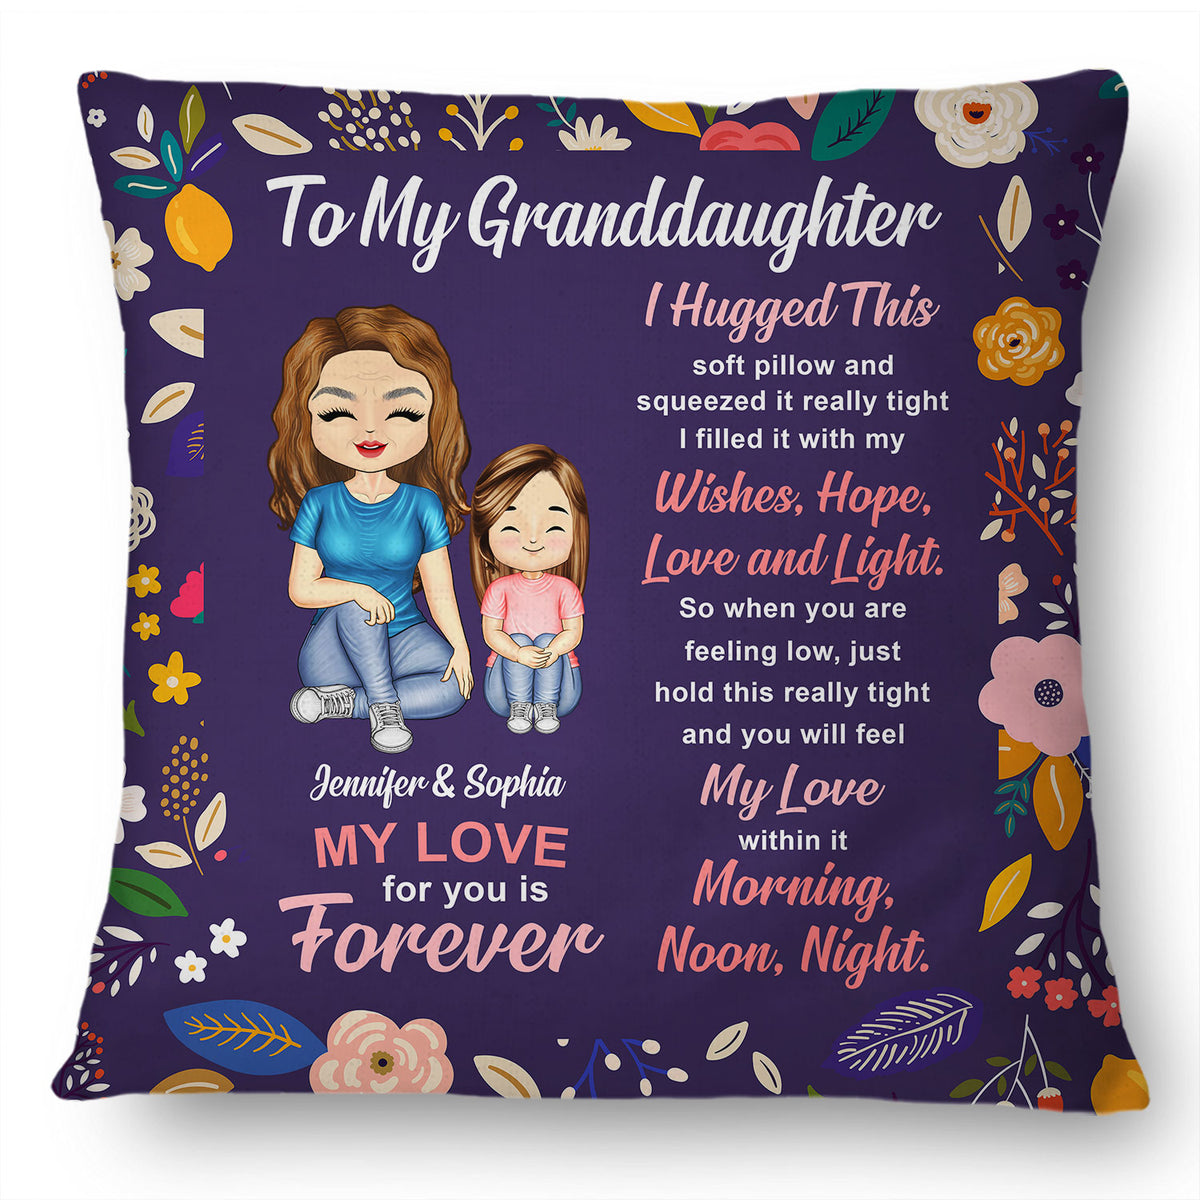 To My Granddaughter - Gift For Granddaughter, Grandparents Gift - Pers ...